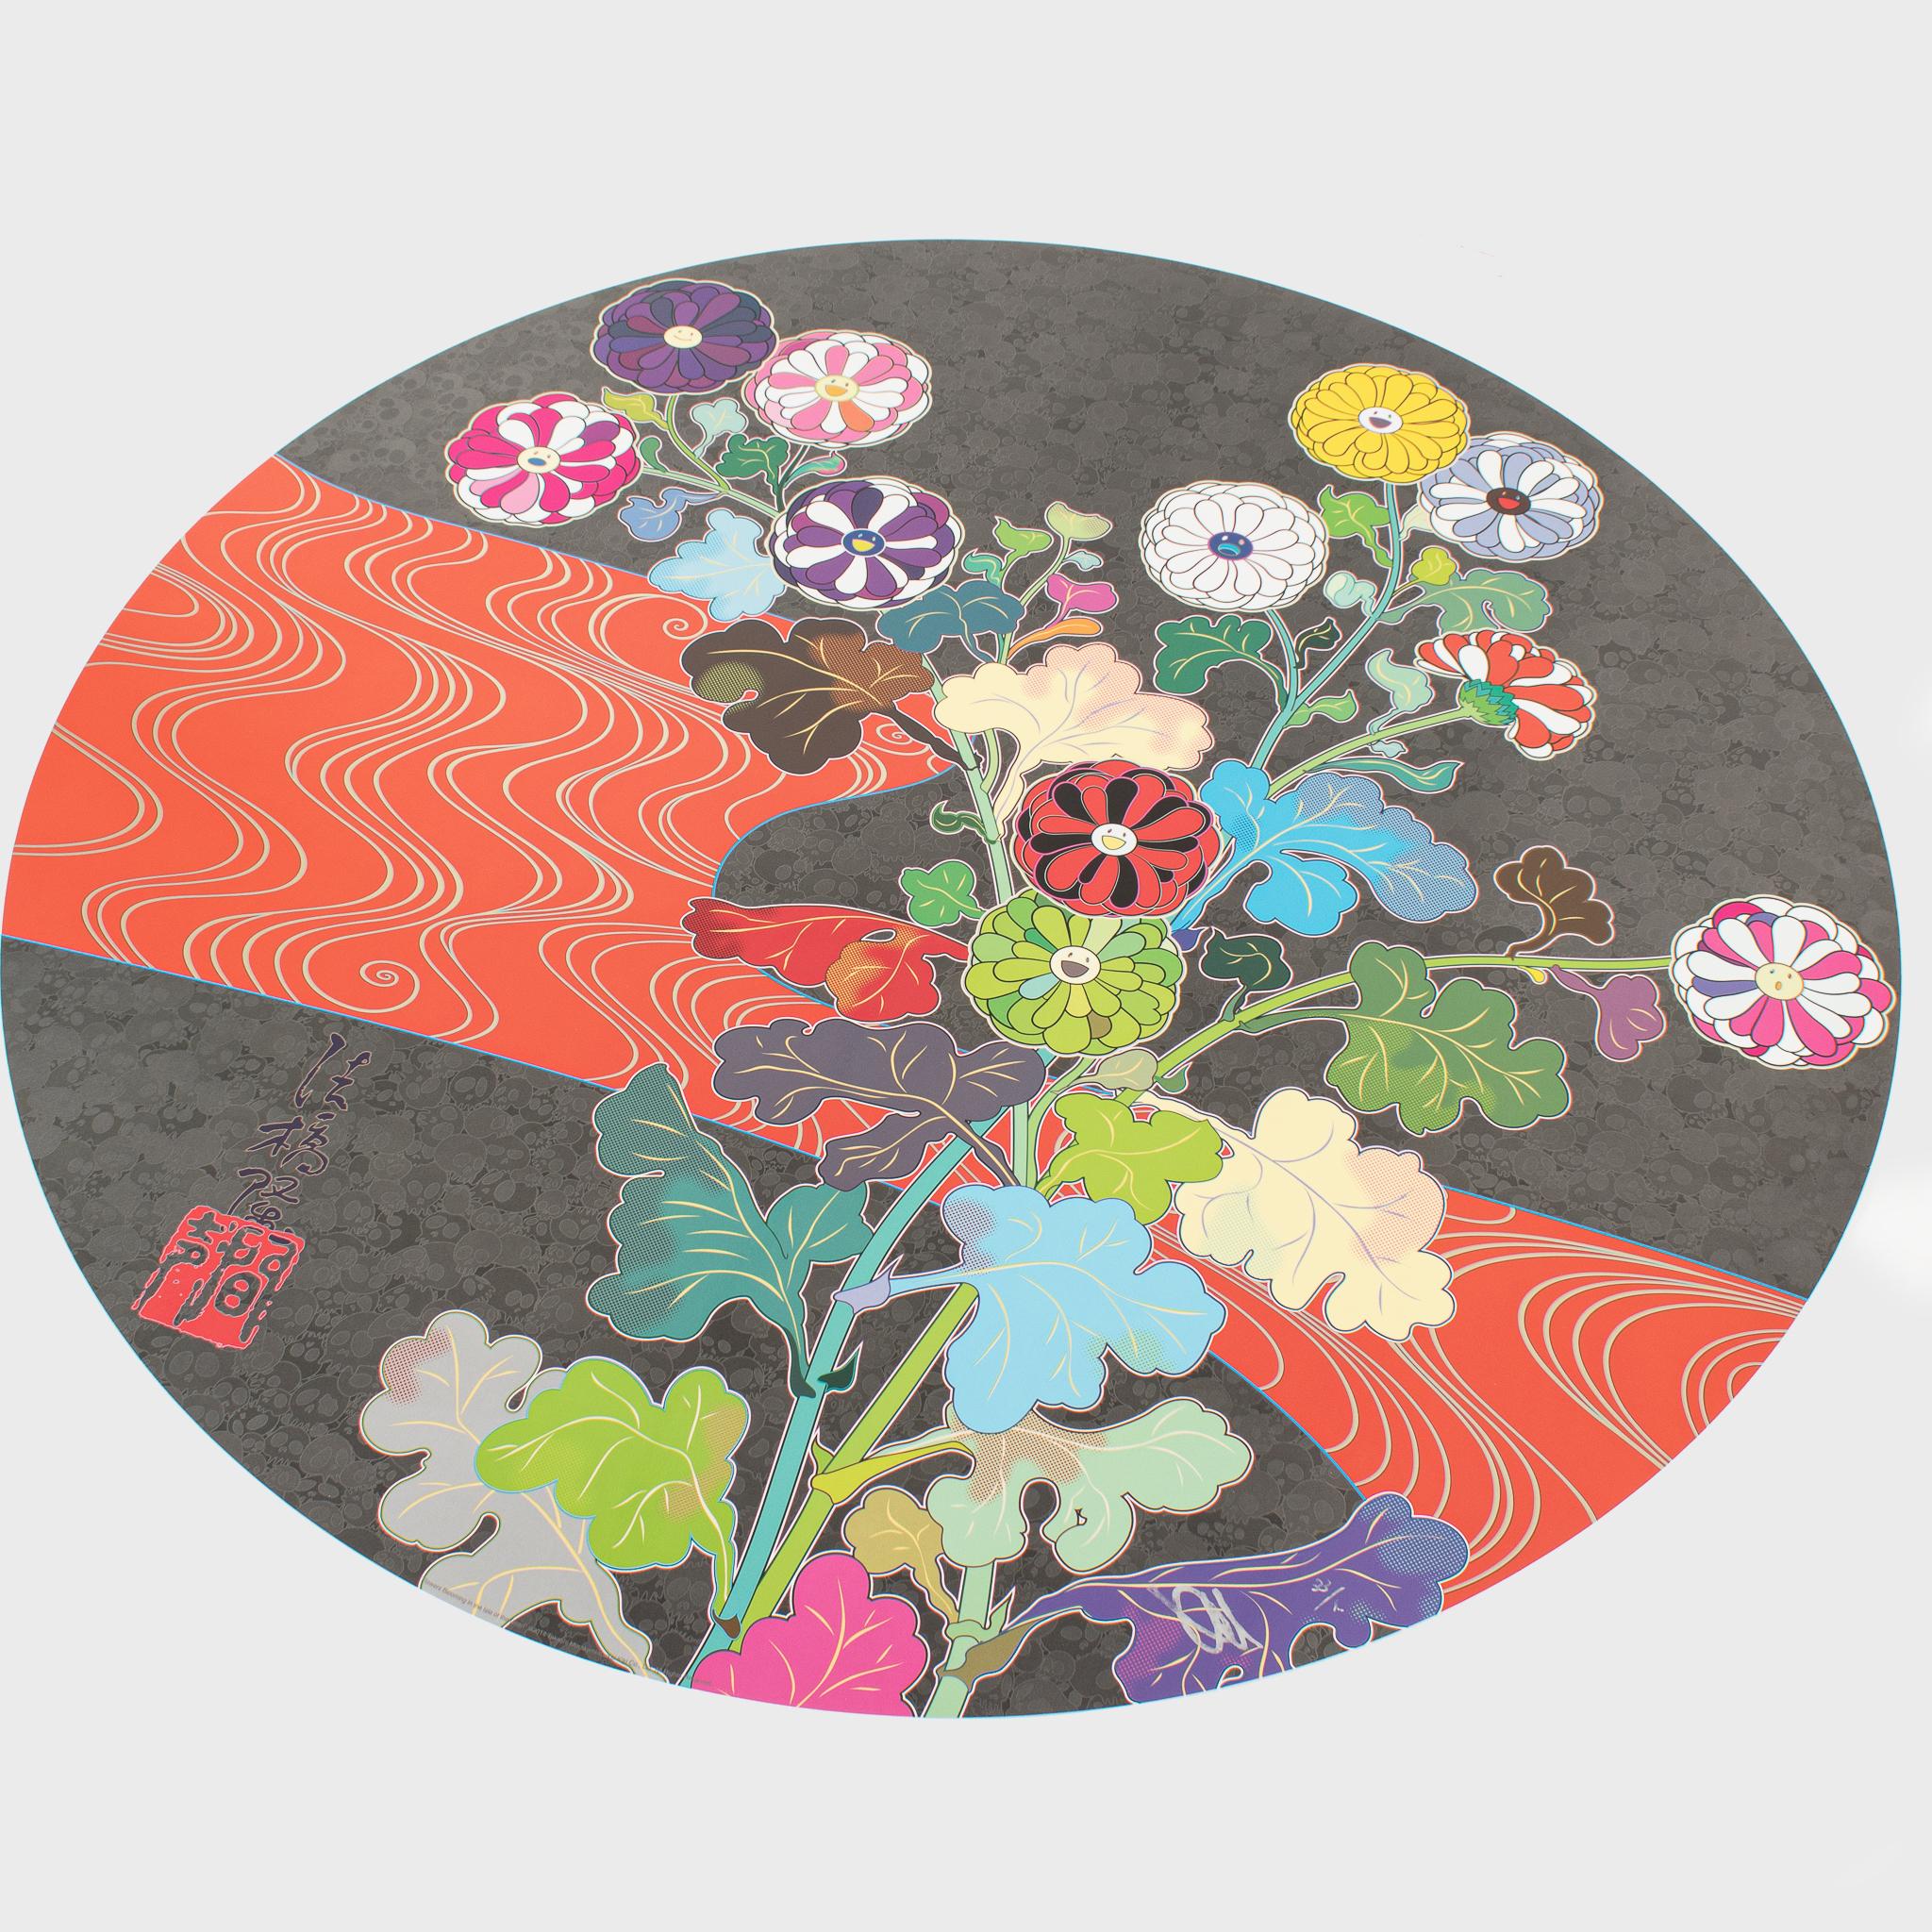 Flowers Blooming in the Isle of the Dead - Print by Takashi Murakami